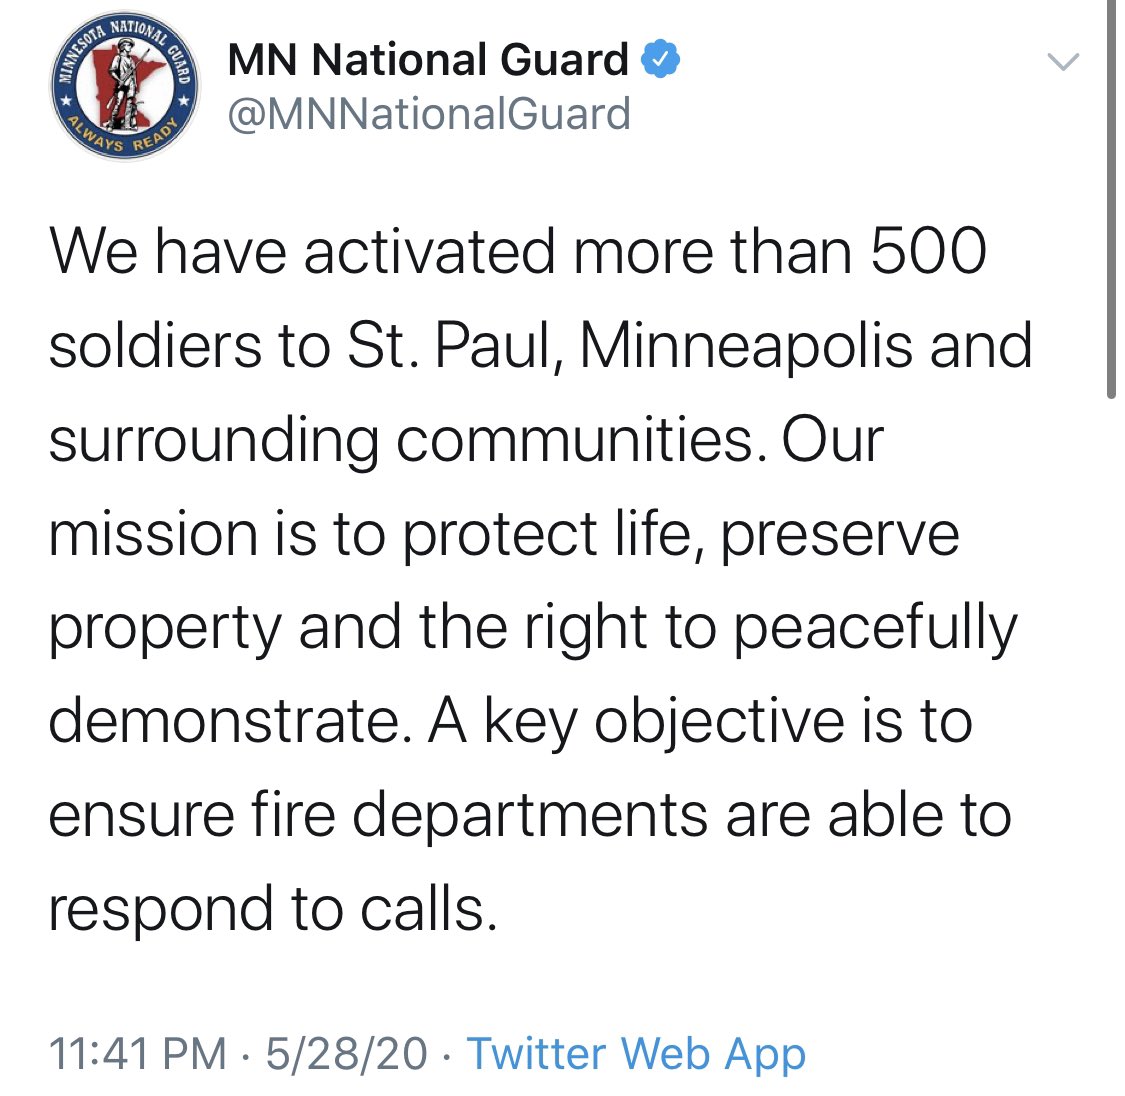 An appalling, inhumane statement by the president of the United States, Donald Trump, at nearly 1am.[Also, the Minnesota National Guard already announced it activated 500 soldiers, so, he’s uninformed in addition to everything else.]